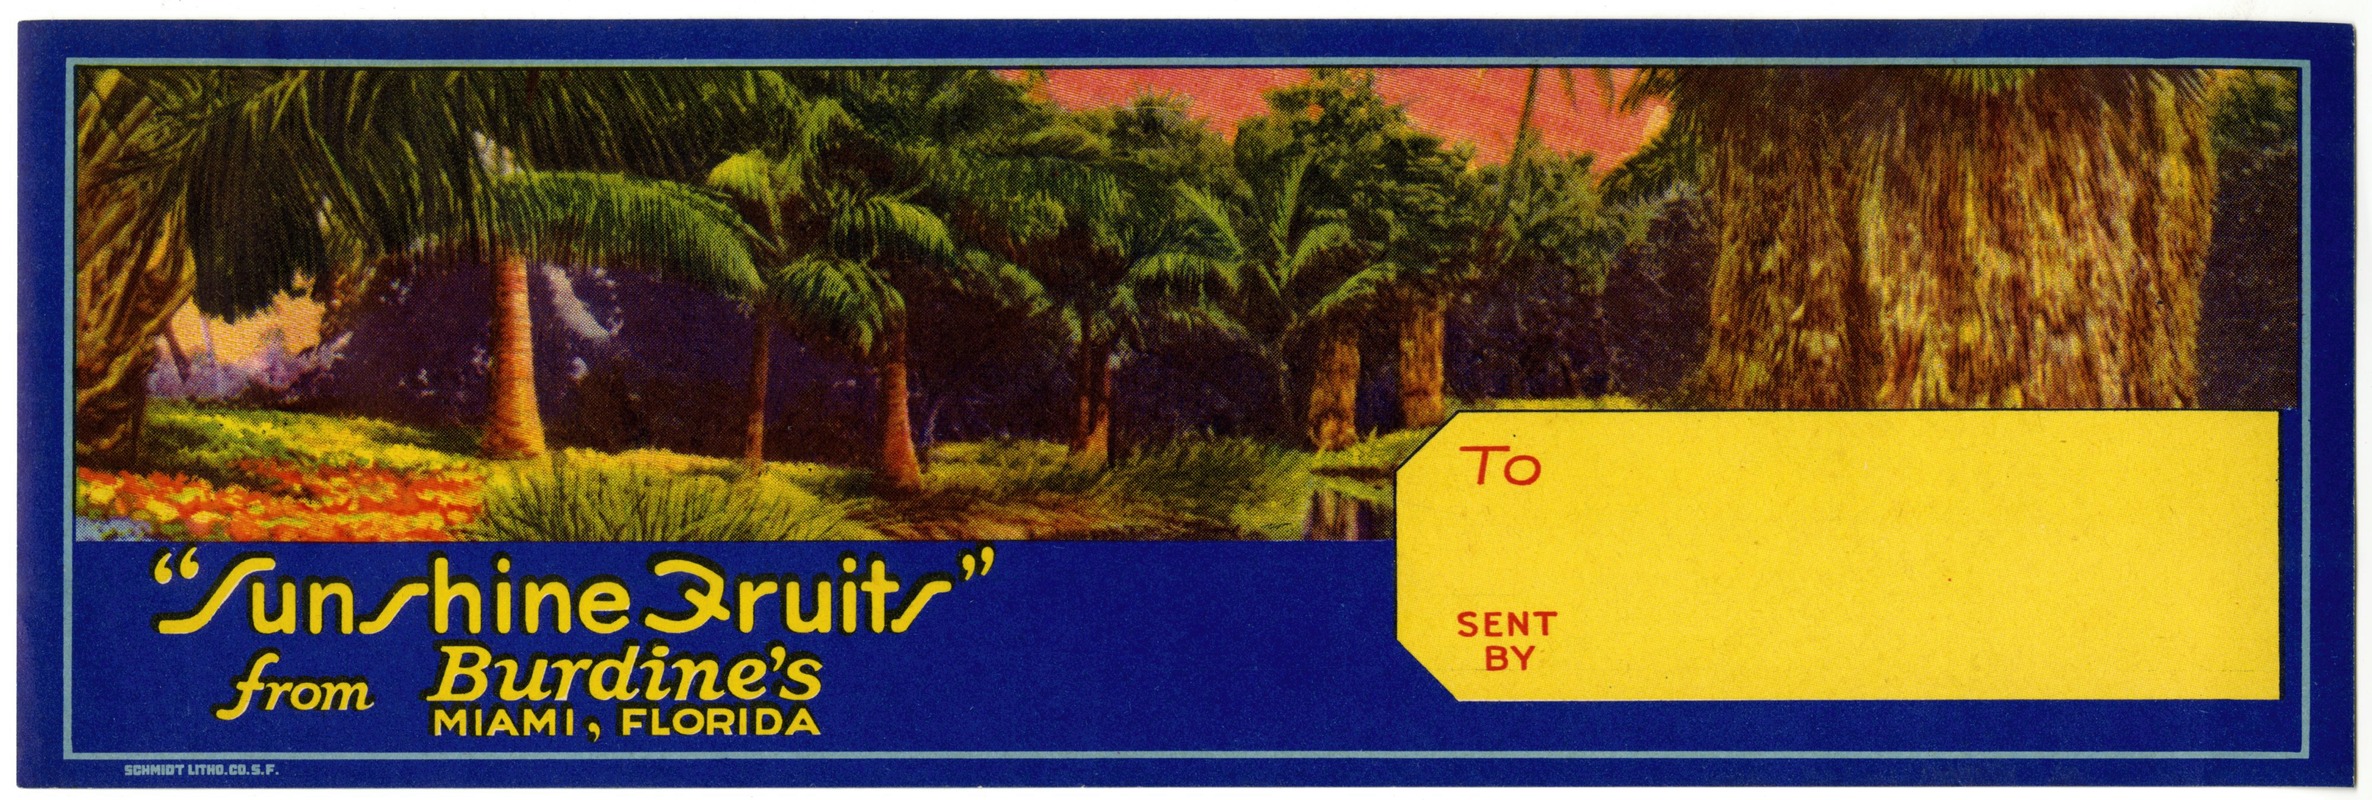 Anonymous - Gift Box Label for ‘Sunshine Fruits’ from Burdine’s Date